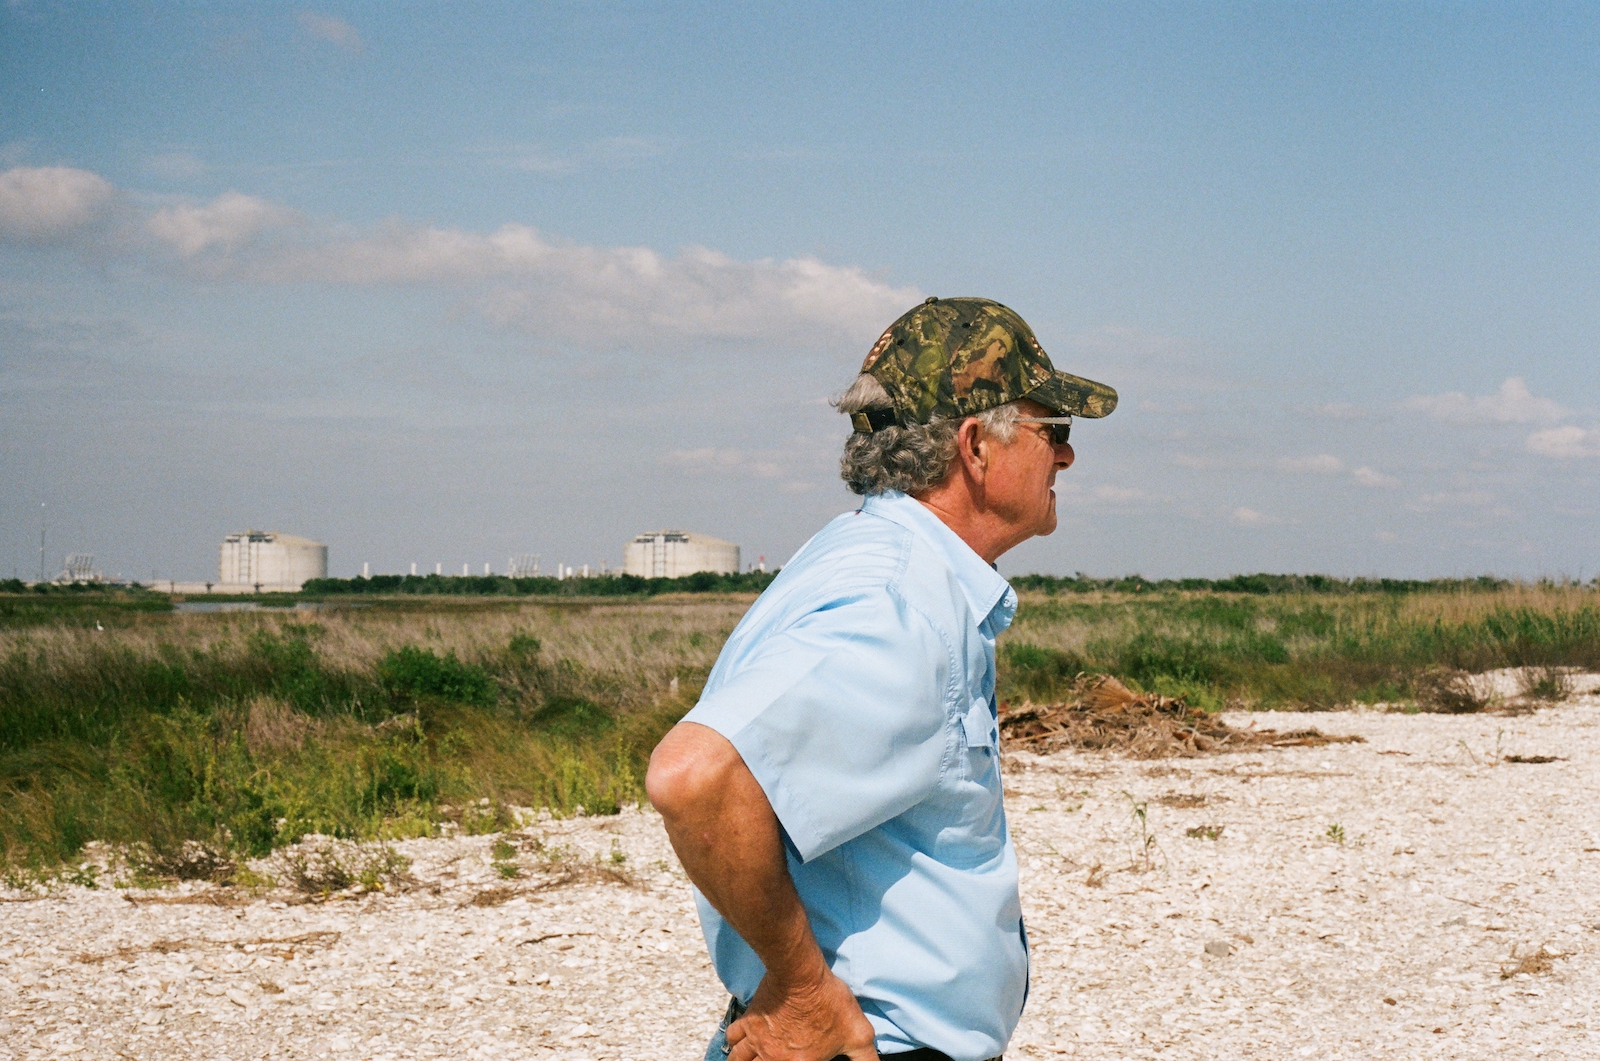 a man in a baseball cap and blue shirt looks away from the camera